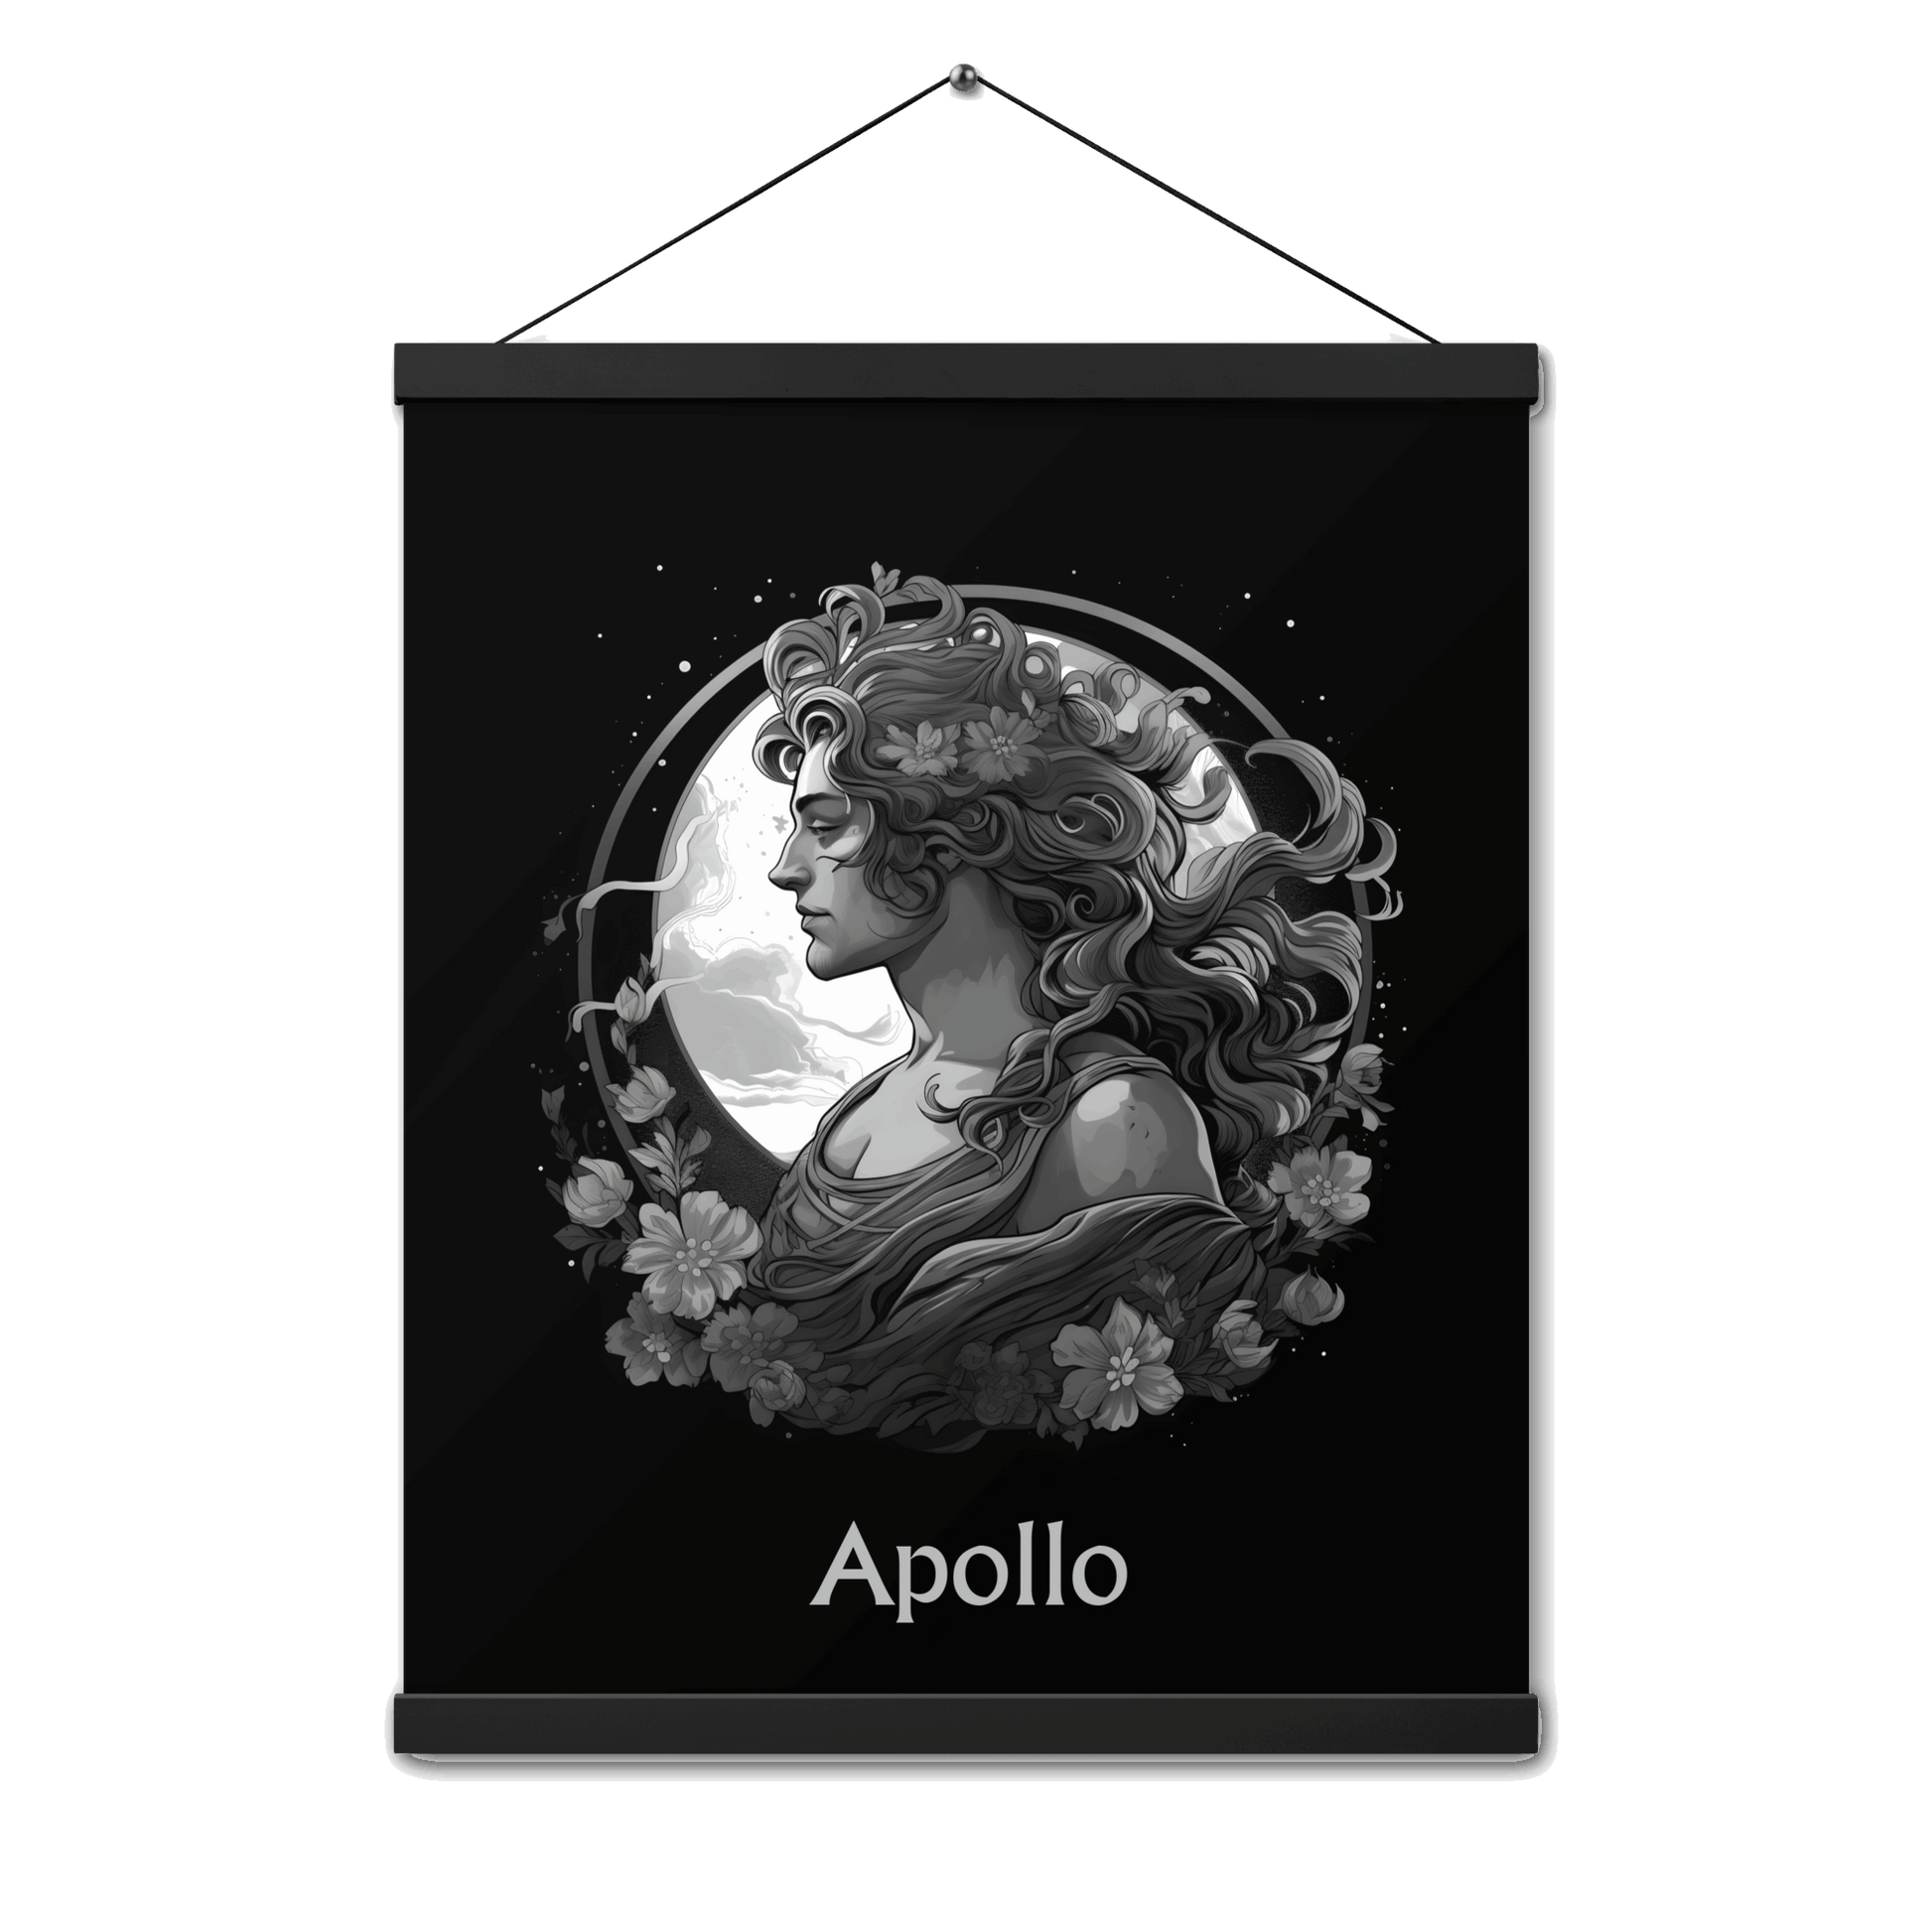 Apollo's Luminance - Black and White Hanging Wall Art High Quality Matte Poster DrawDadDraw